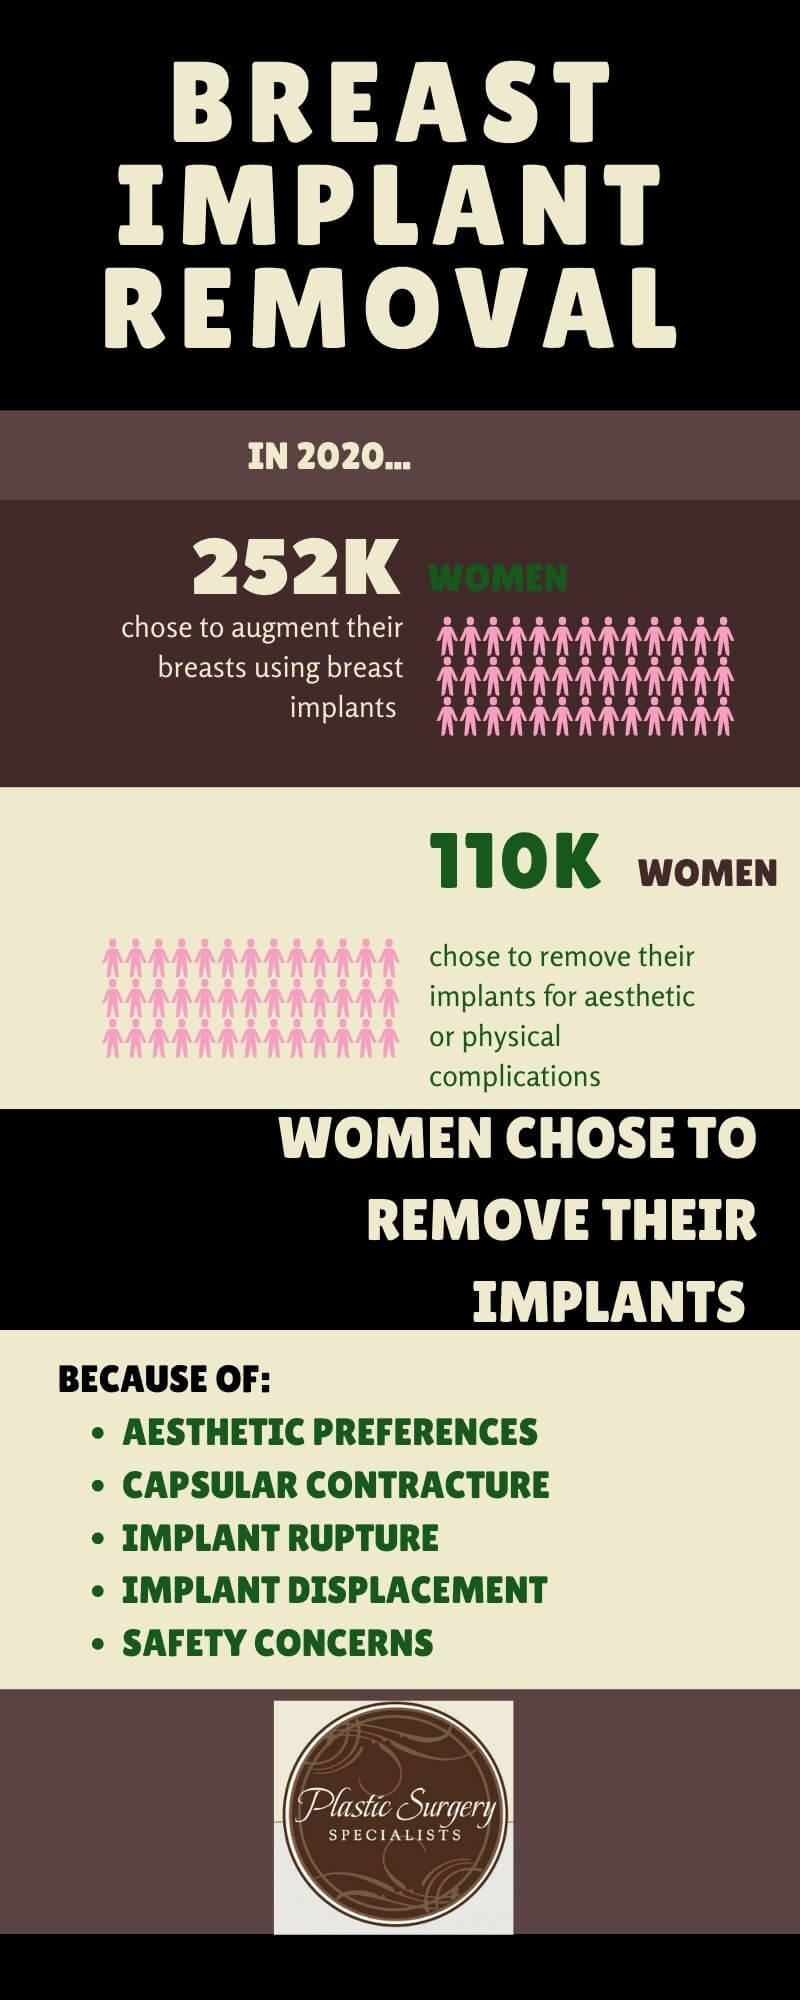 Infographic showing breast implant removal statistics.